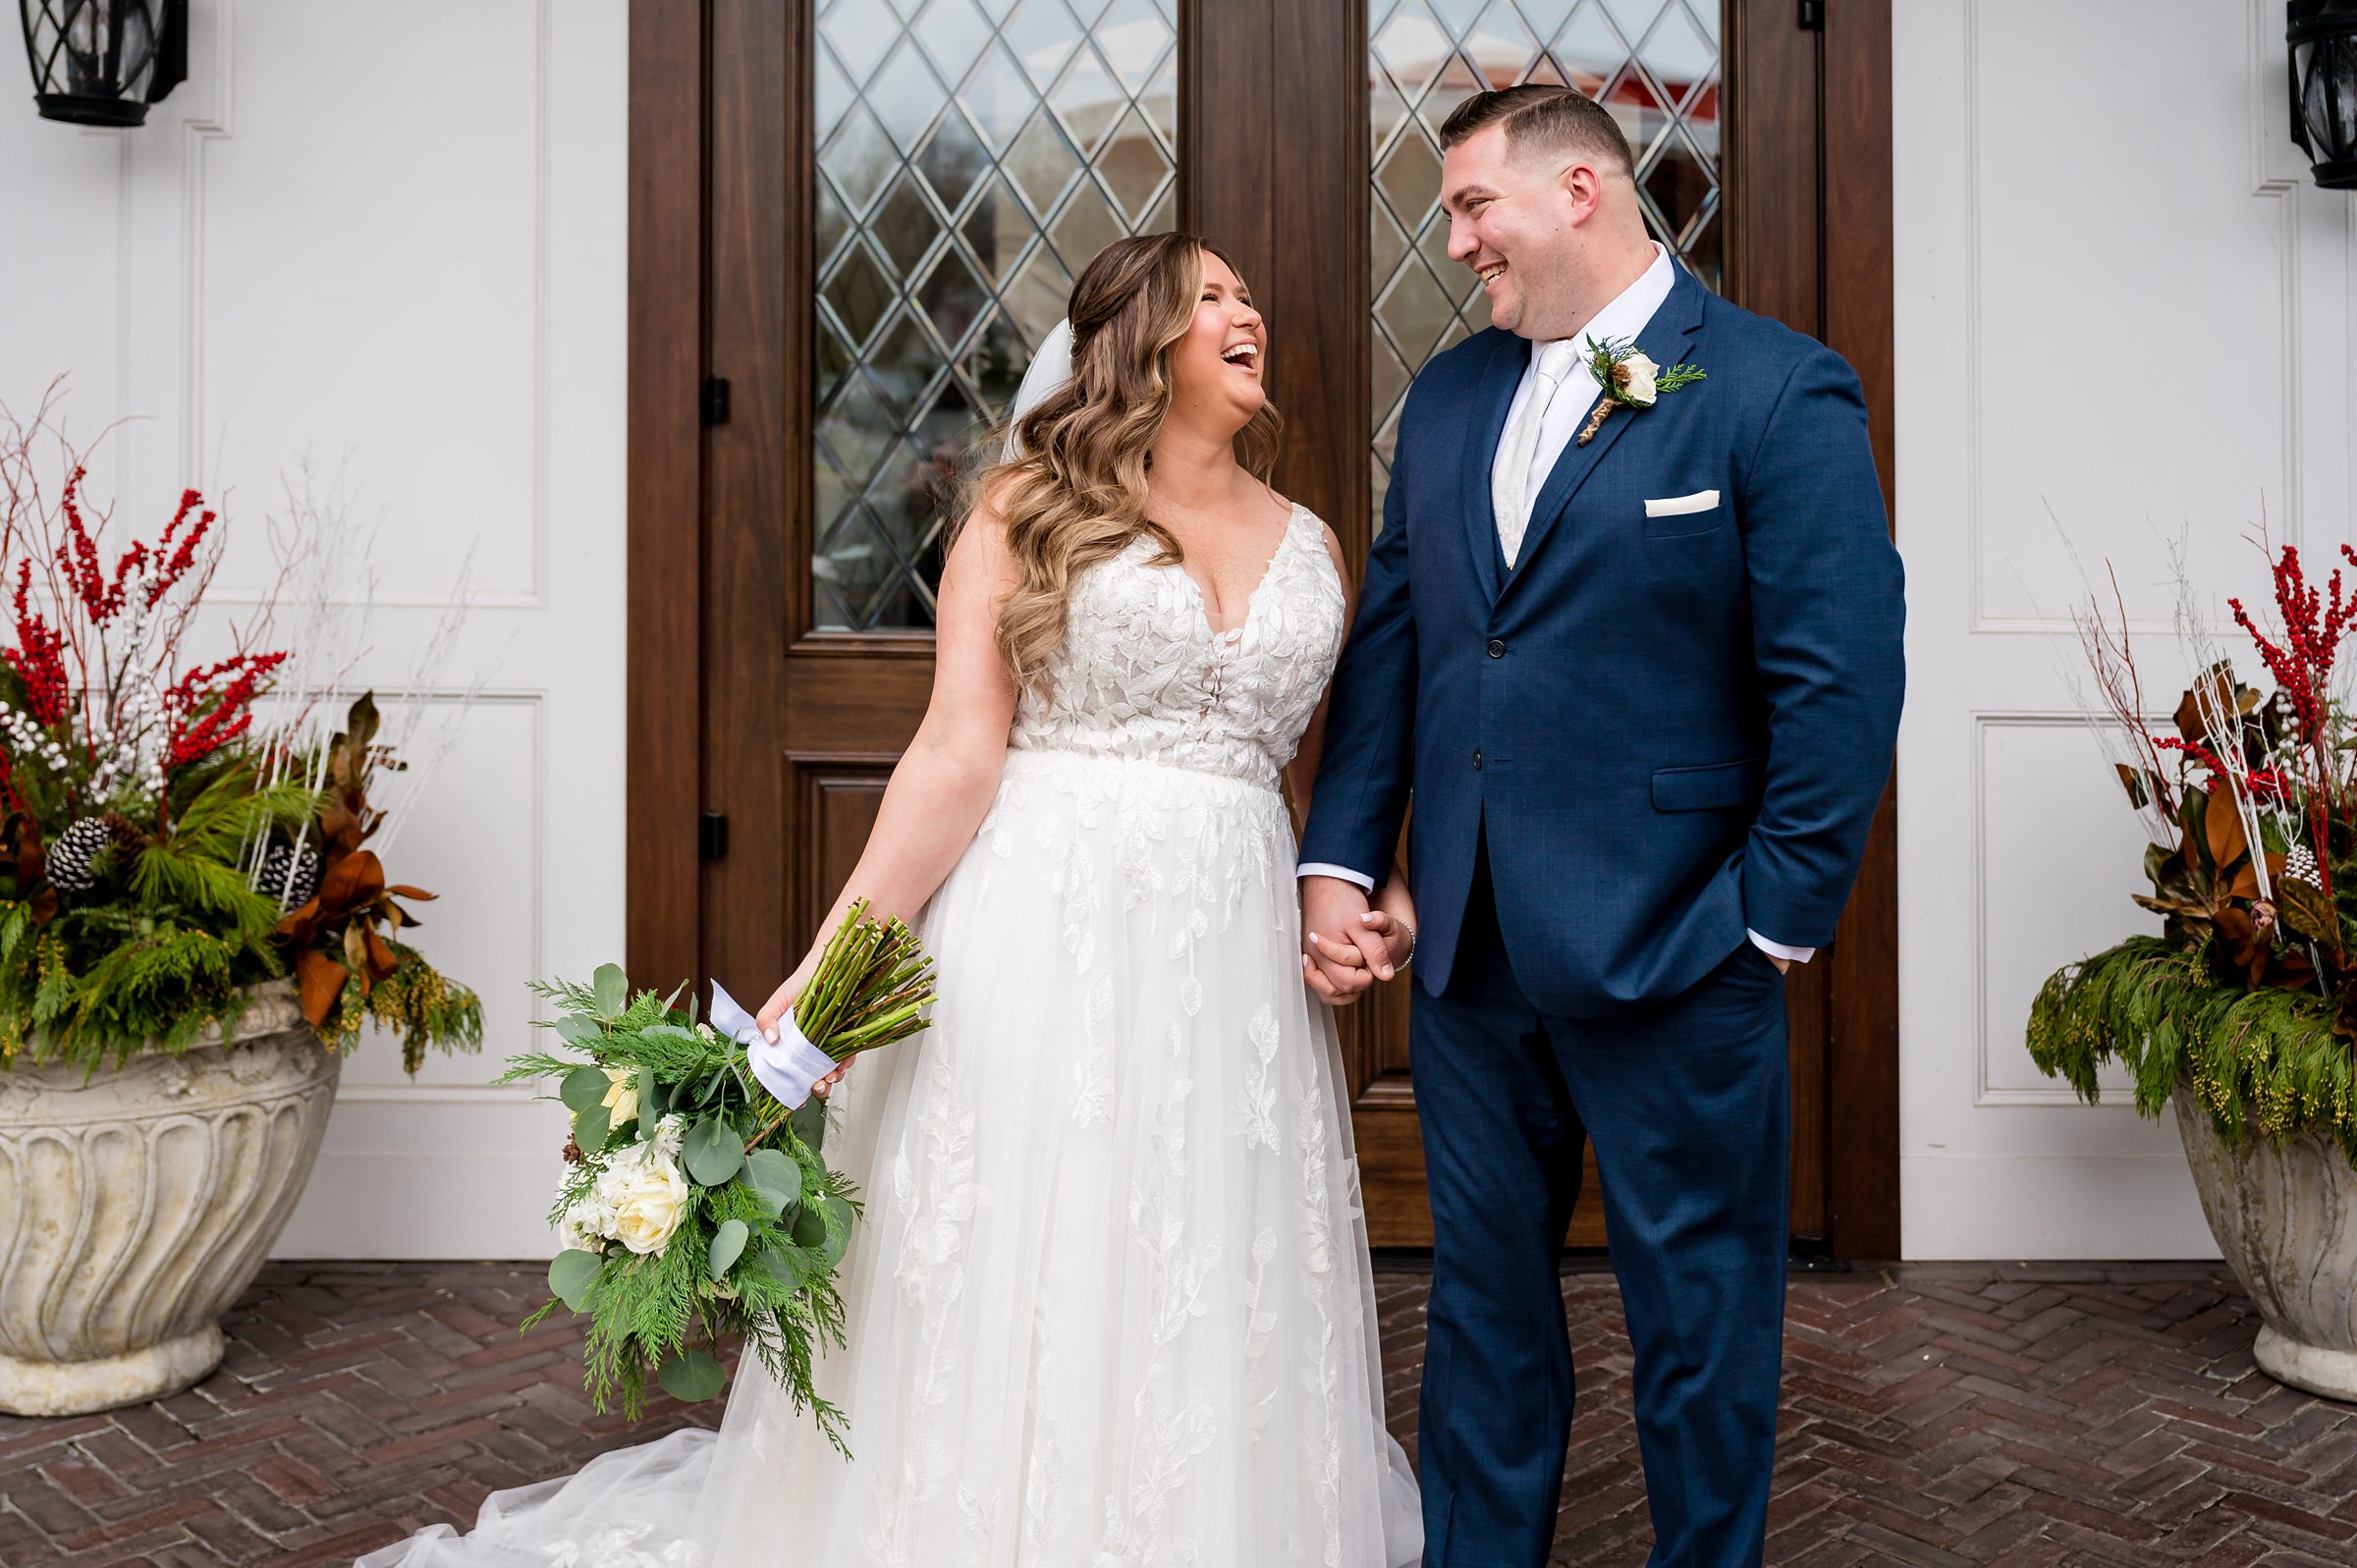 A bride and groom smiling in front of a door.